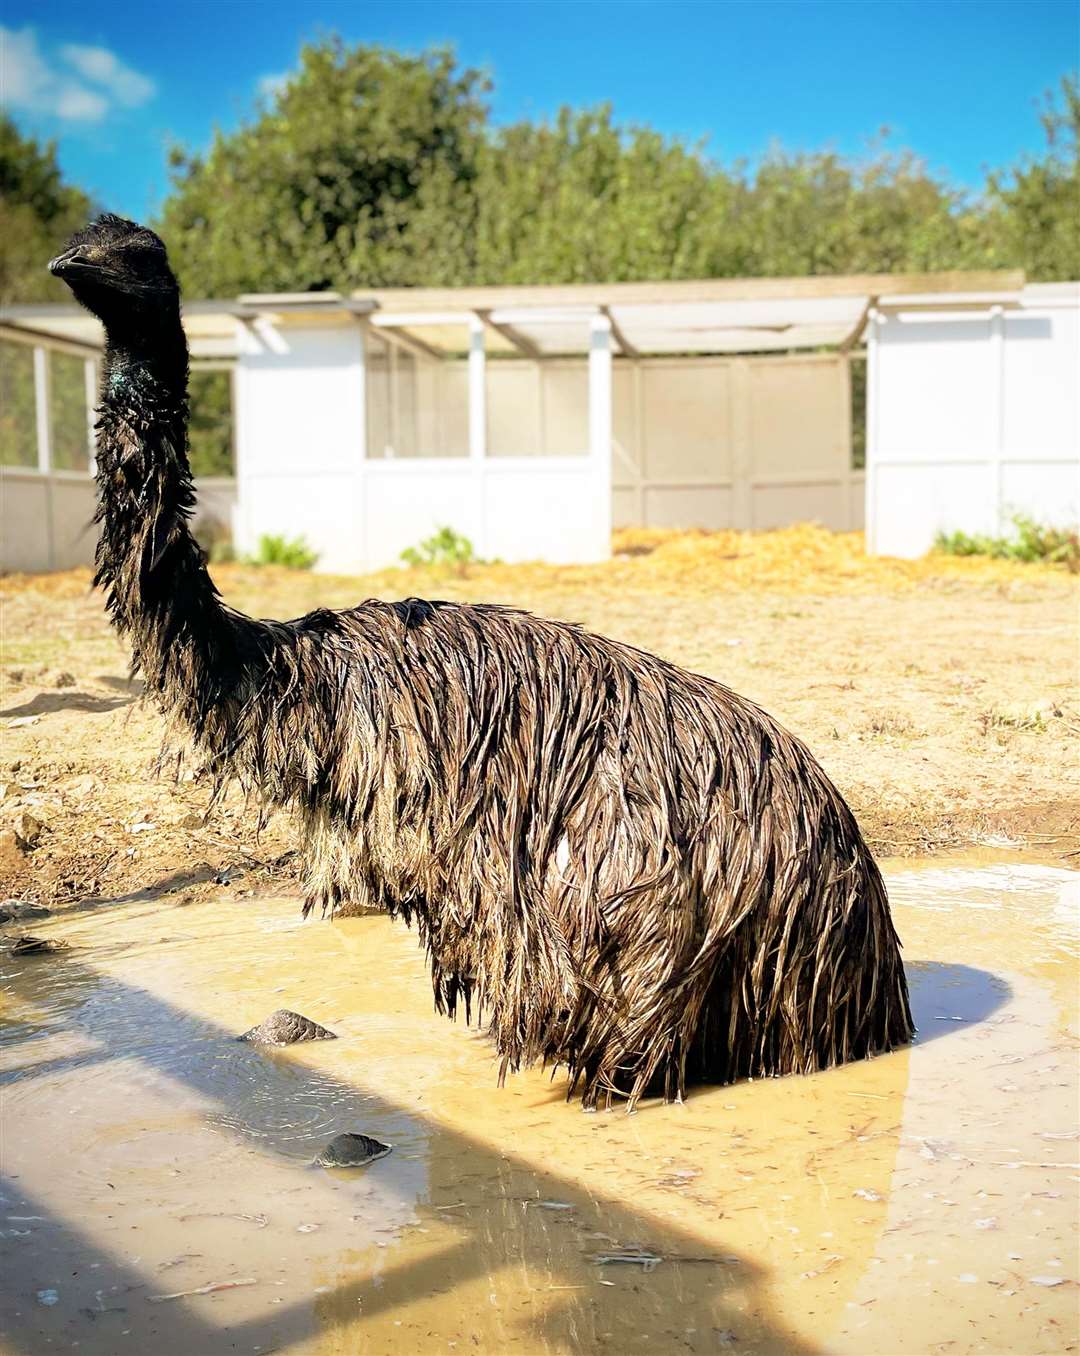 The emu is described as "really tame and friendly," by owner Amey